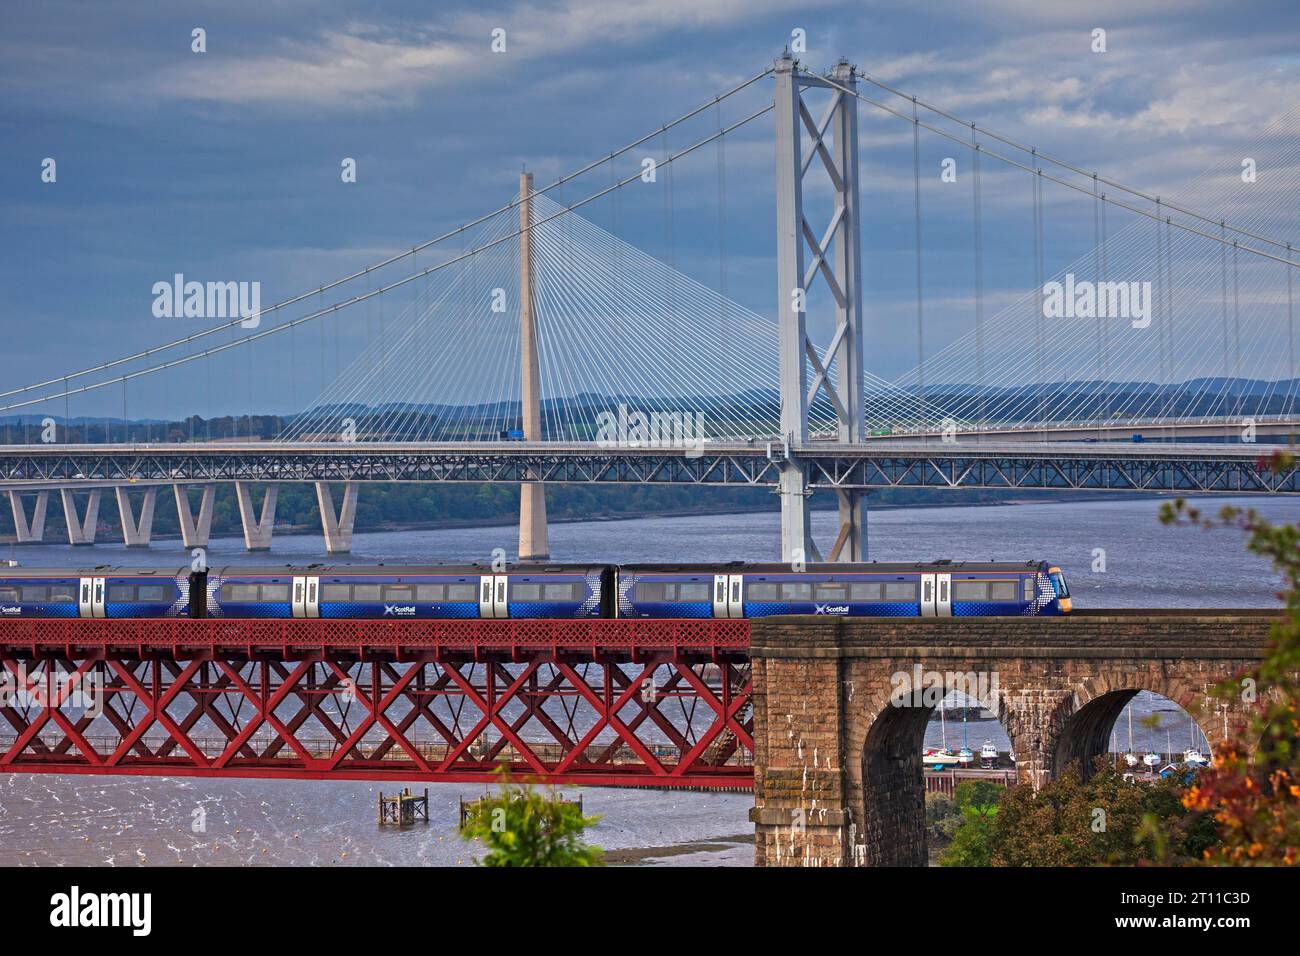 Scotrail diesel train crossing Forth Rail Bridge with Forth Road Bridge and Queensferry Crossing in background, North Queensferry, Fife, Scotland, UK Stock Photo